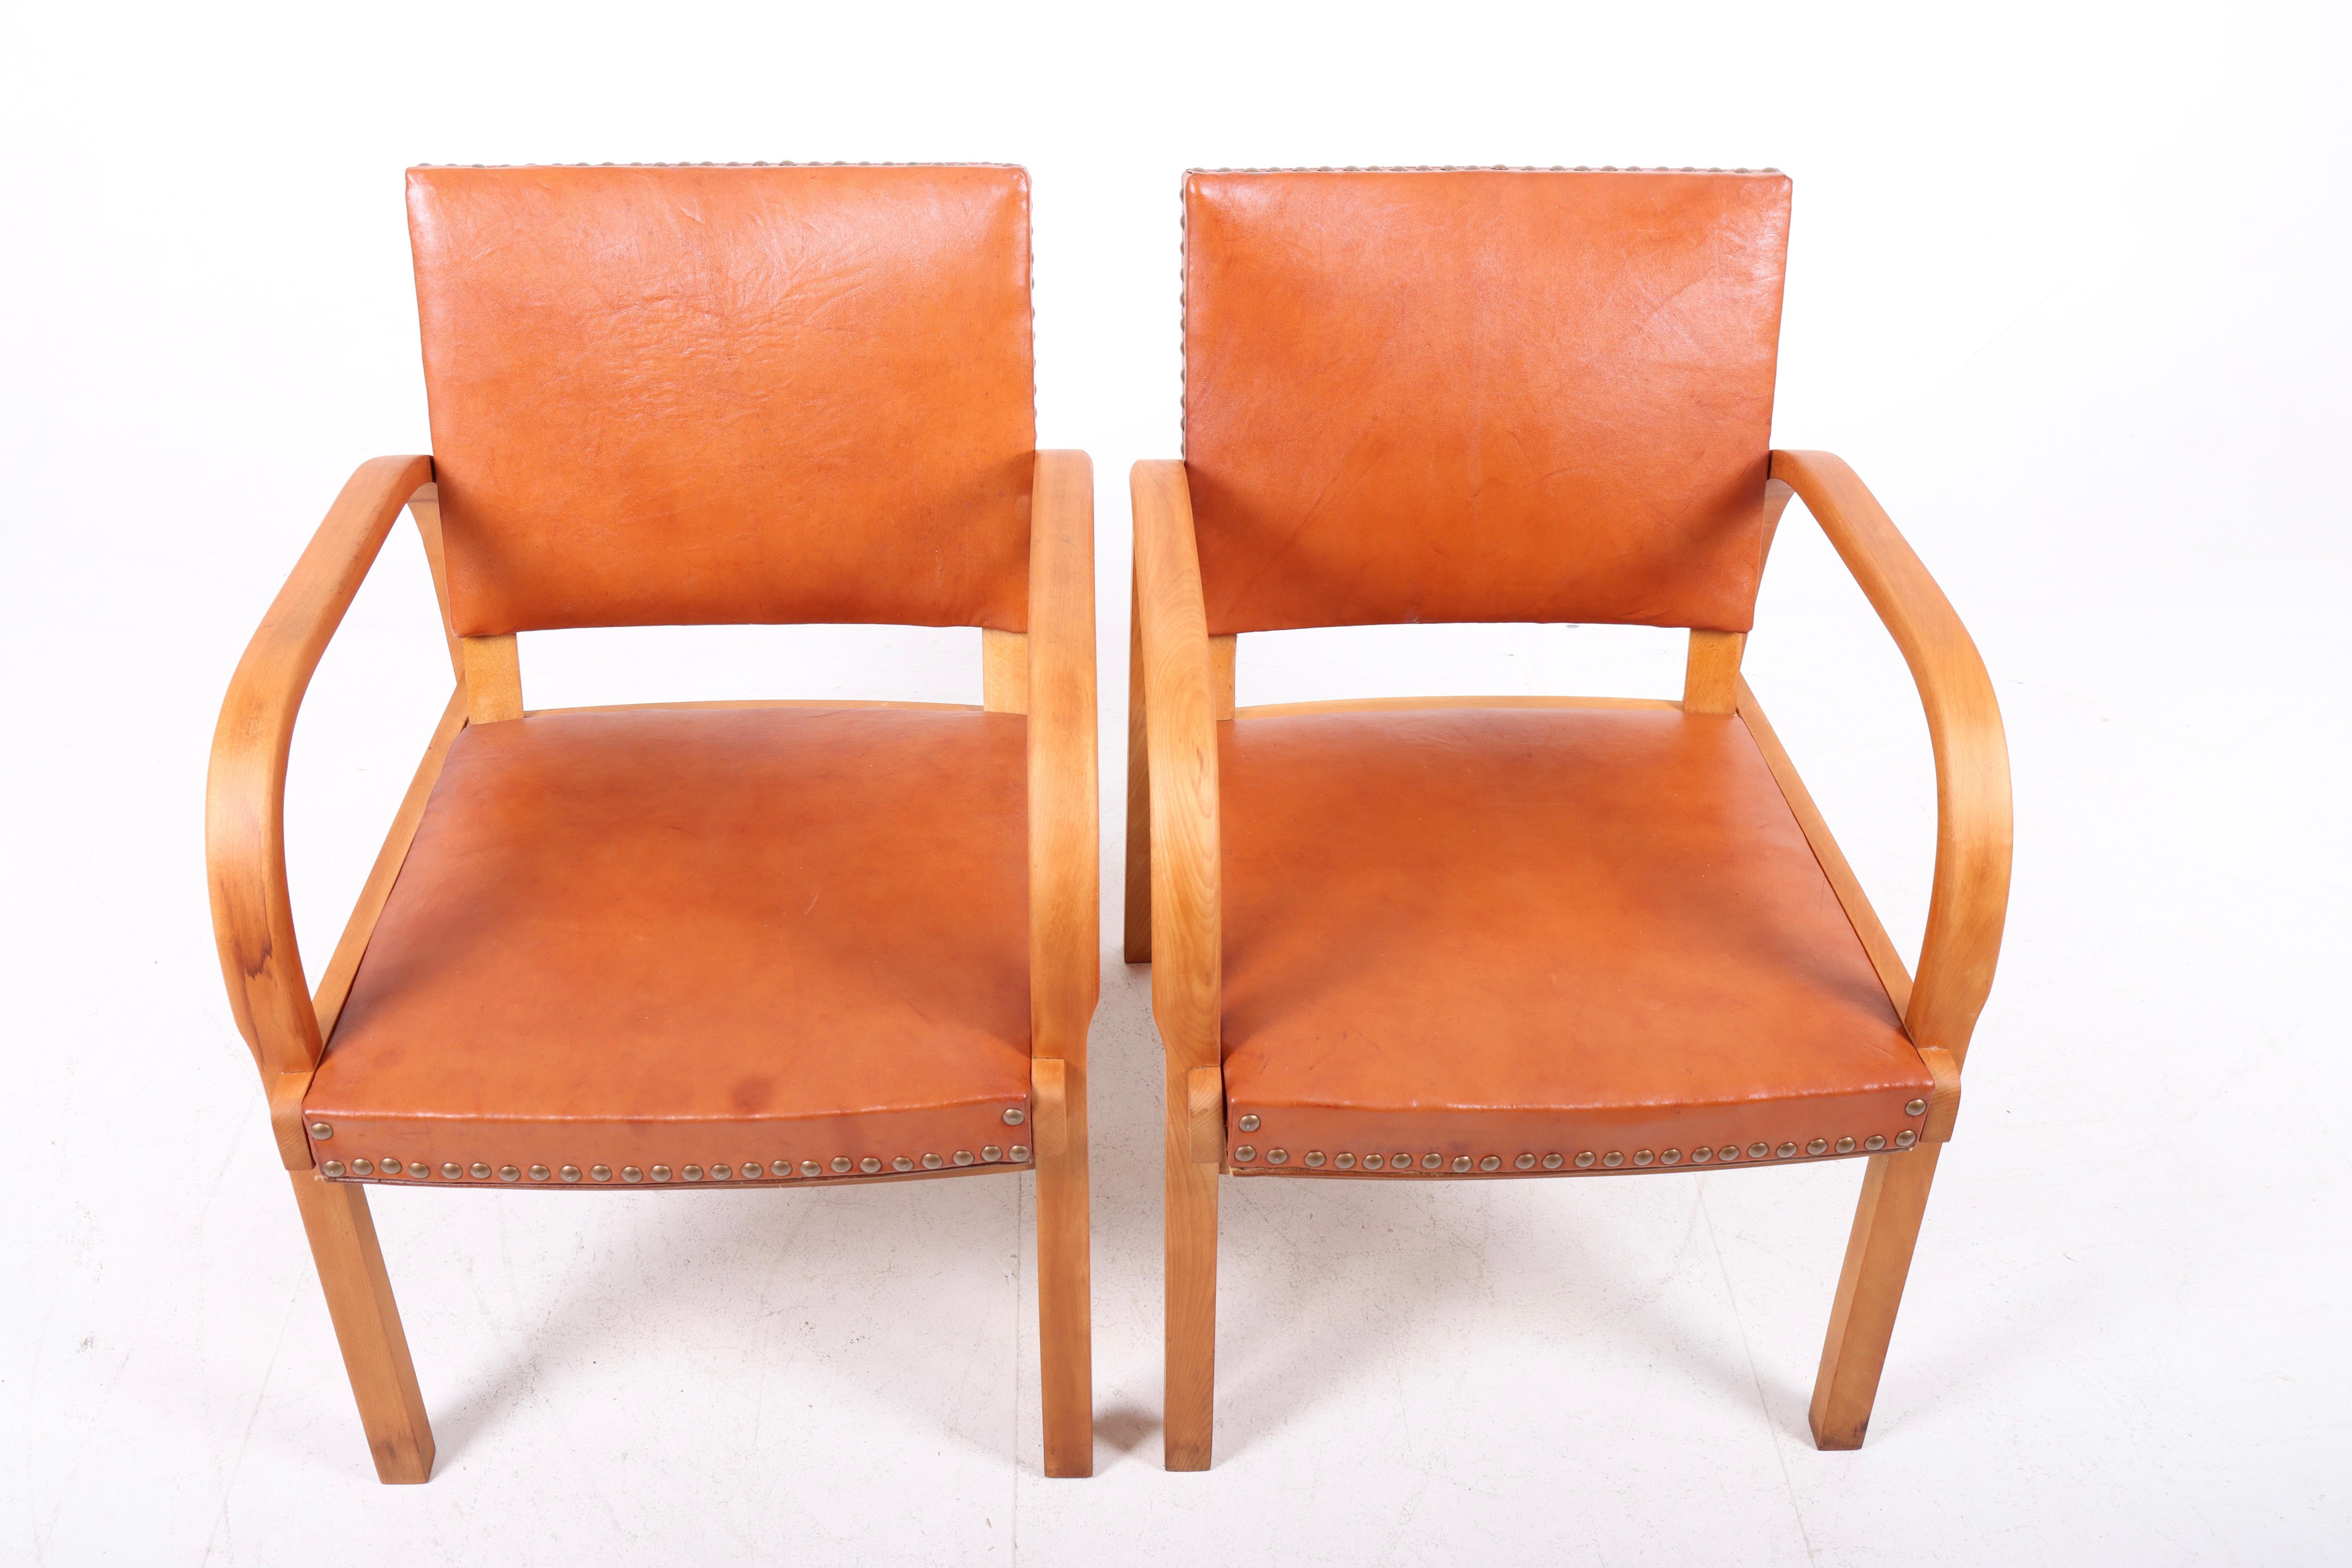 Pair of Danish Lounge Chairs by Magnus L. Stephensen, 1940s For Sale 3